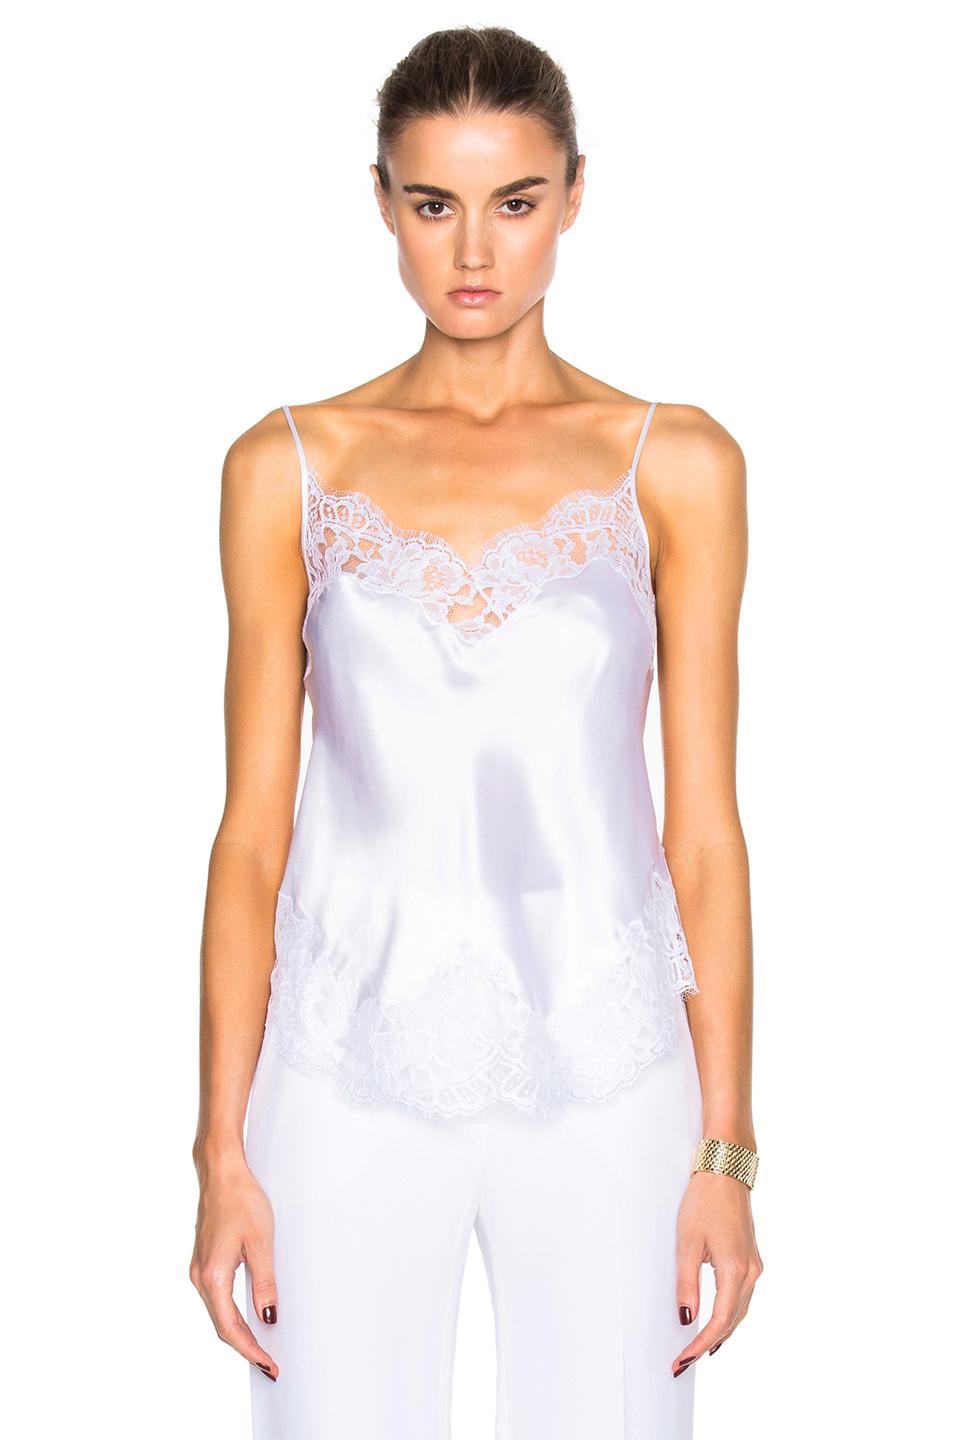 Givenchy Silk Satin Camisole in White - Lyst